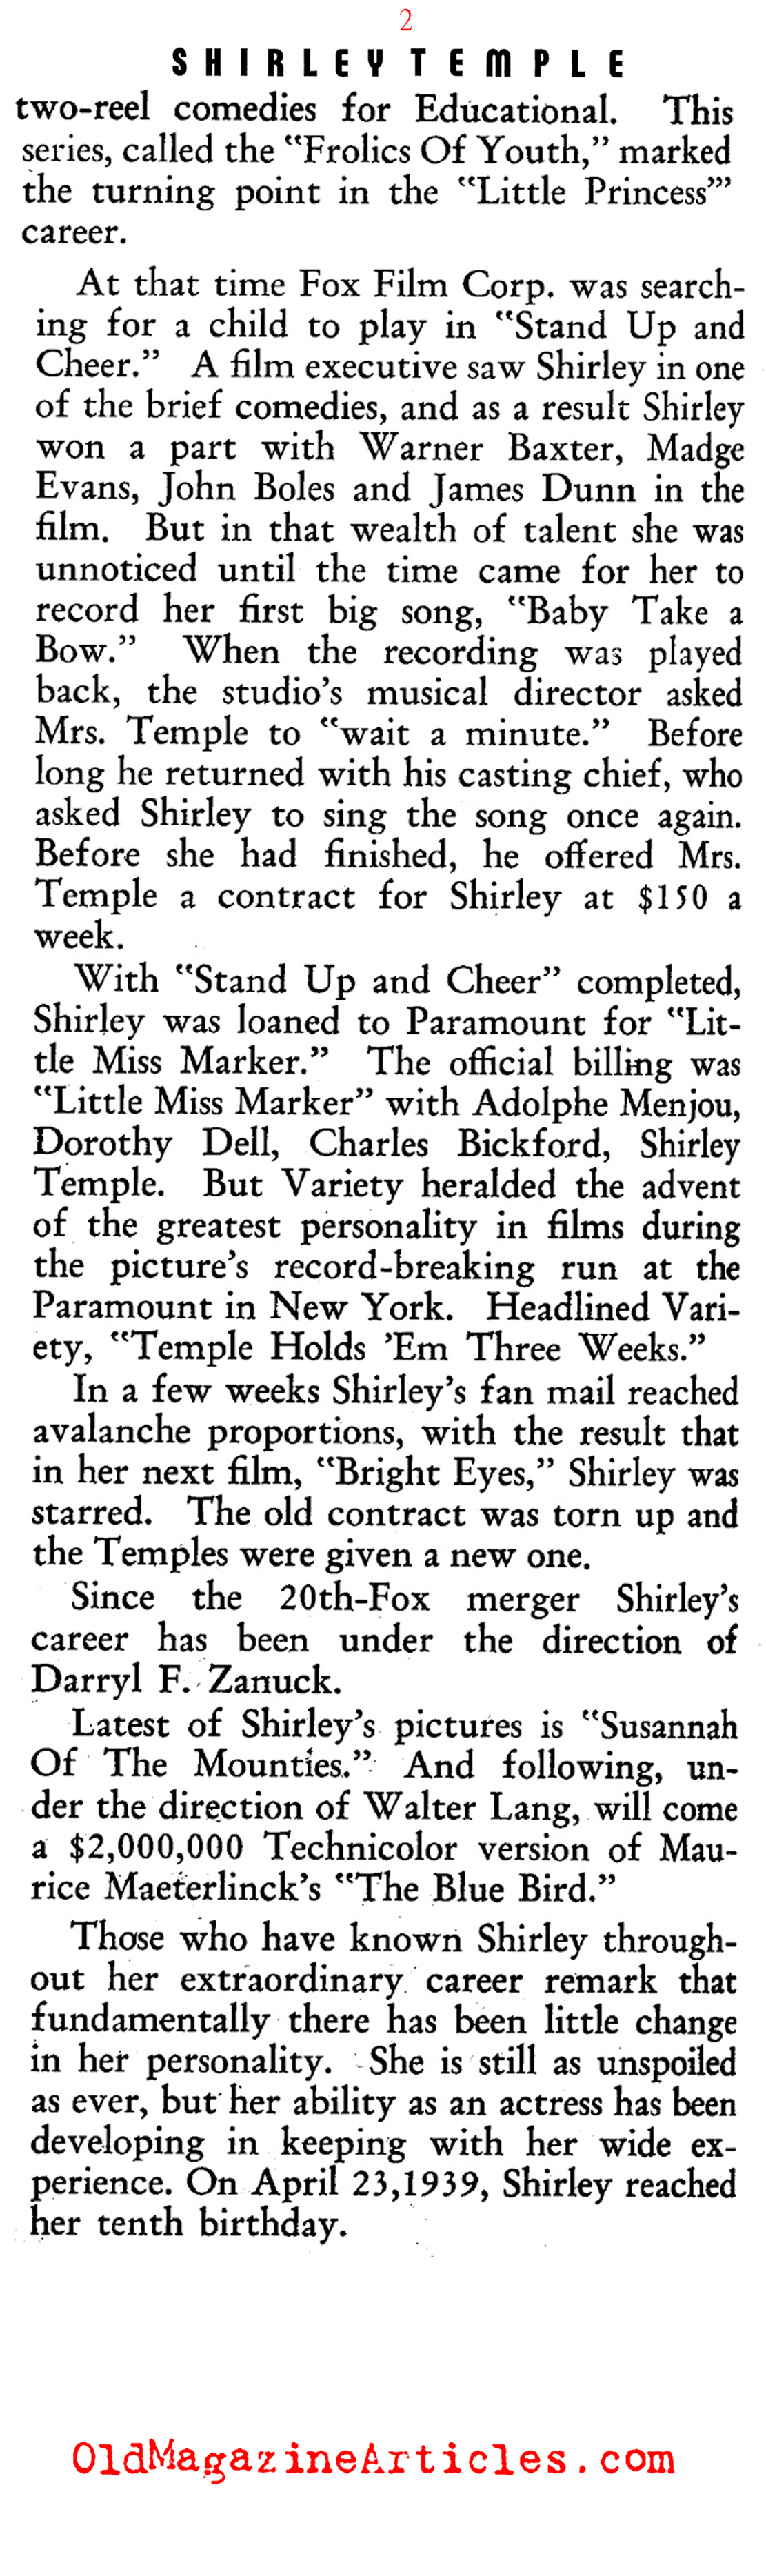 A Profile of Shirley Temple (Film Daily, 1939)